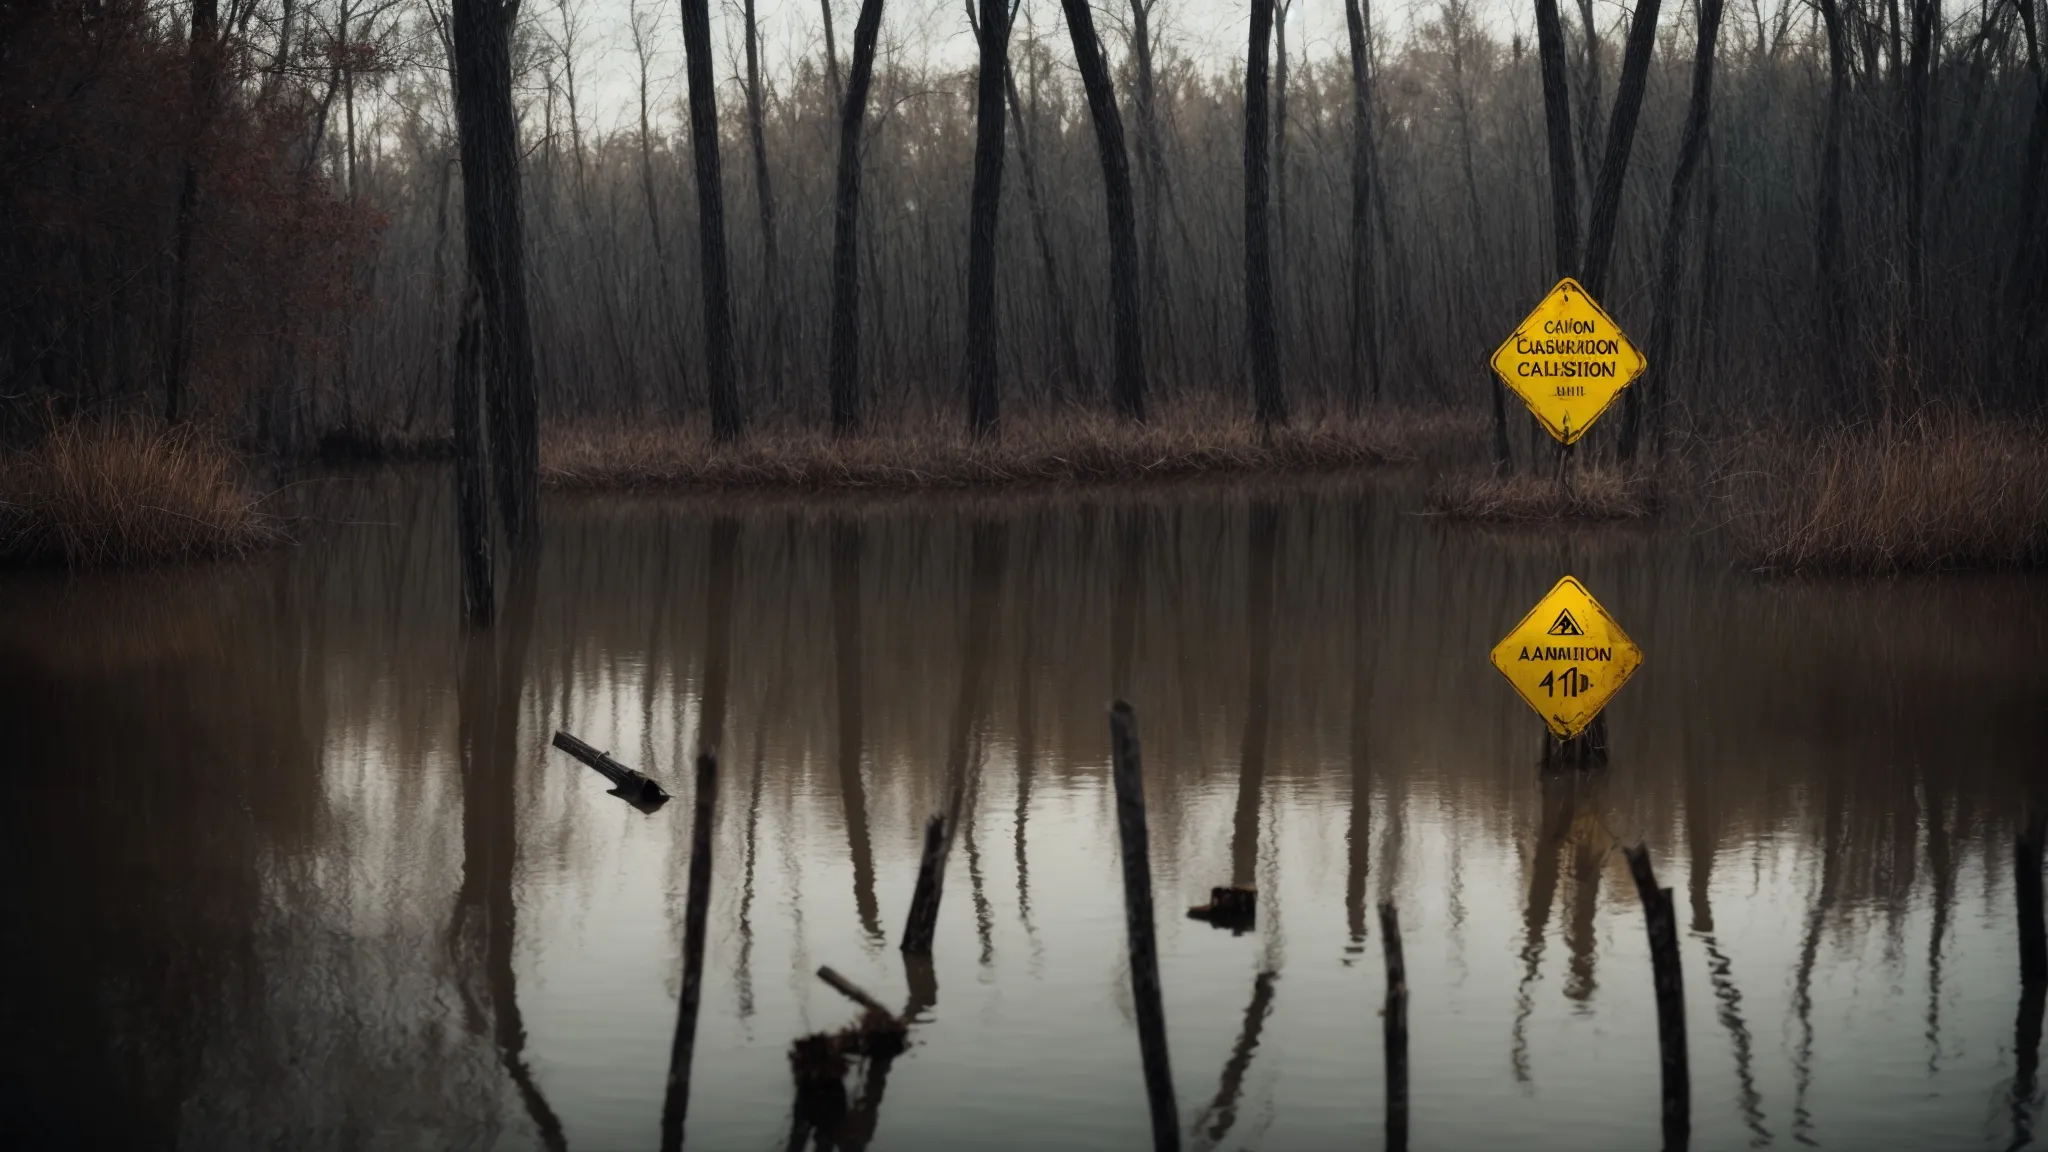 a caution sign submerged in a murky swamp, symbolizing hidden dangers in deceptive seo pricing schemes.